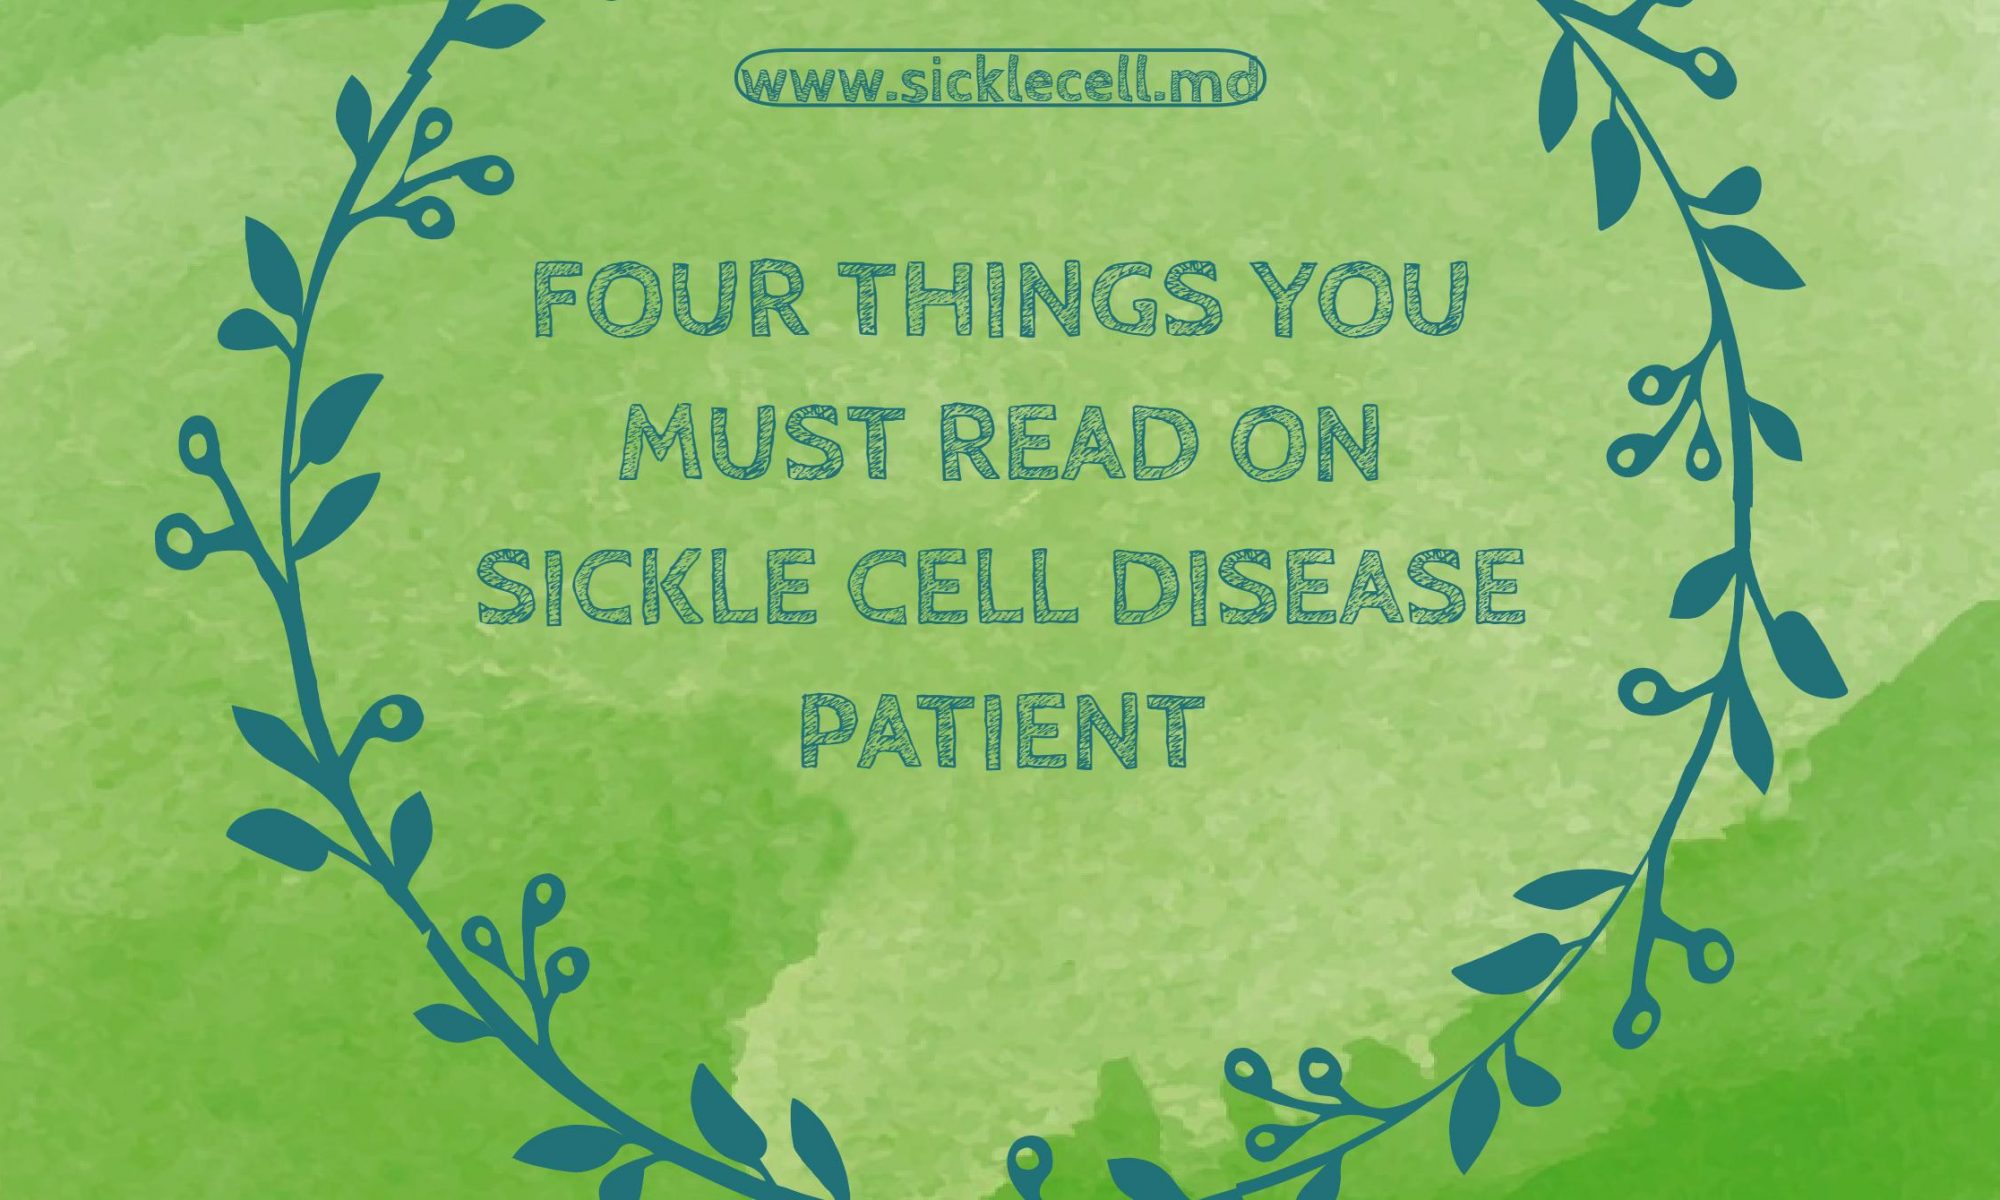 FOUR THINGS YOU MUST READ ON SICKLE CELL DISEASE PATIENT